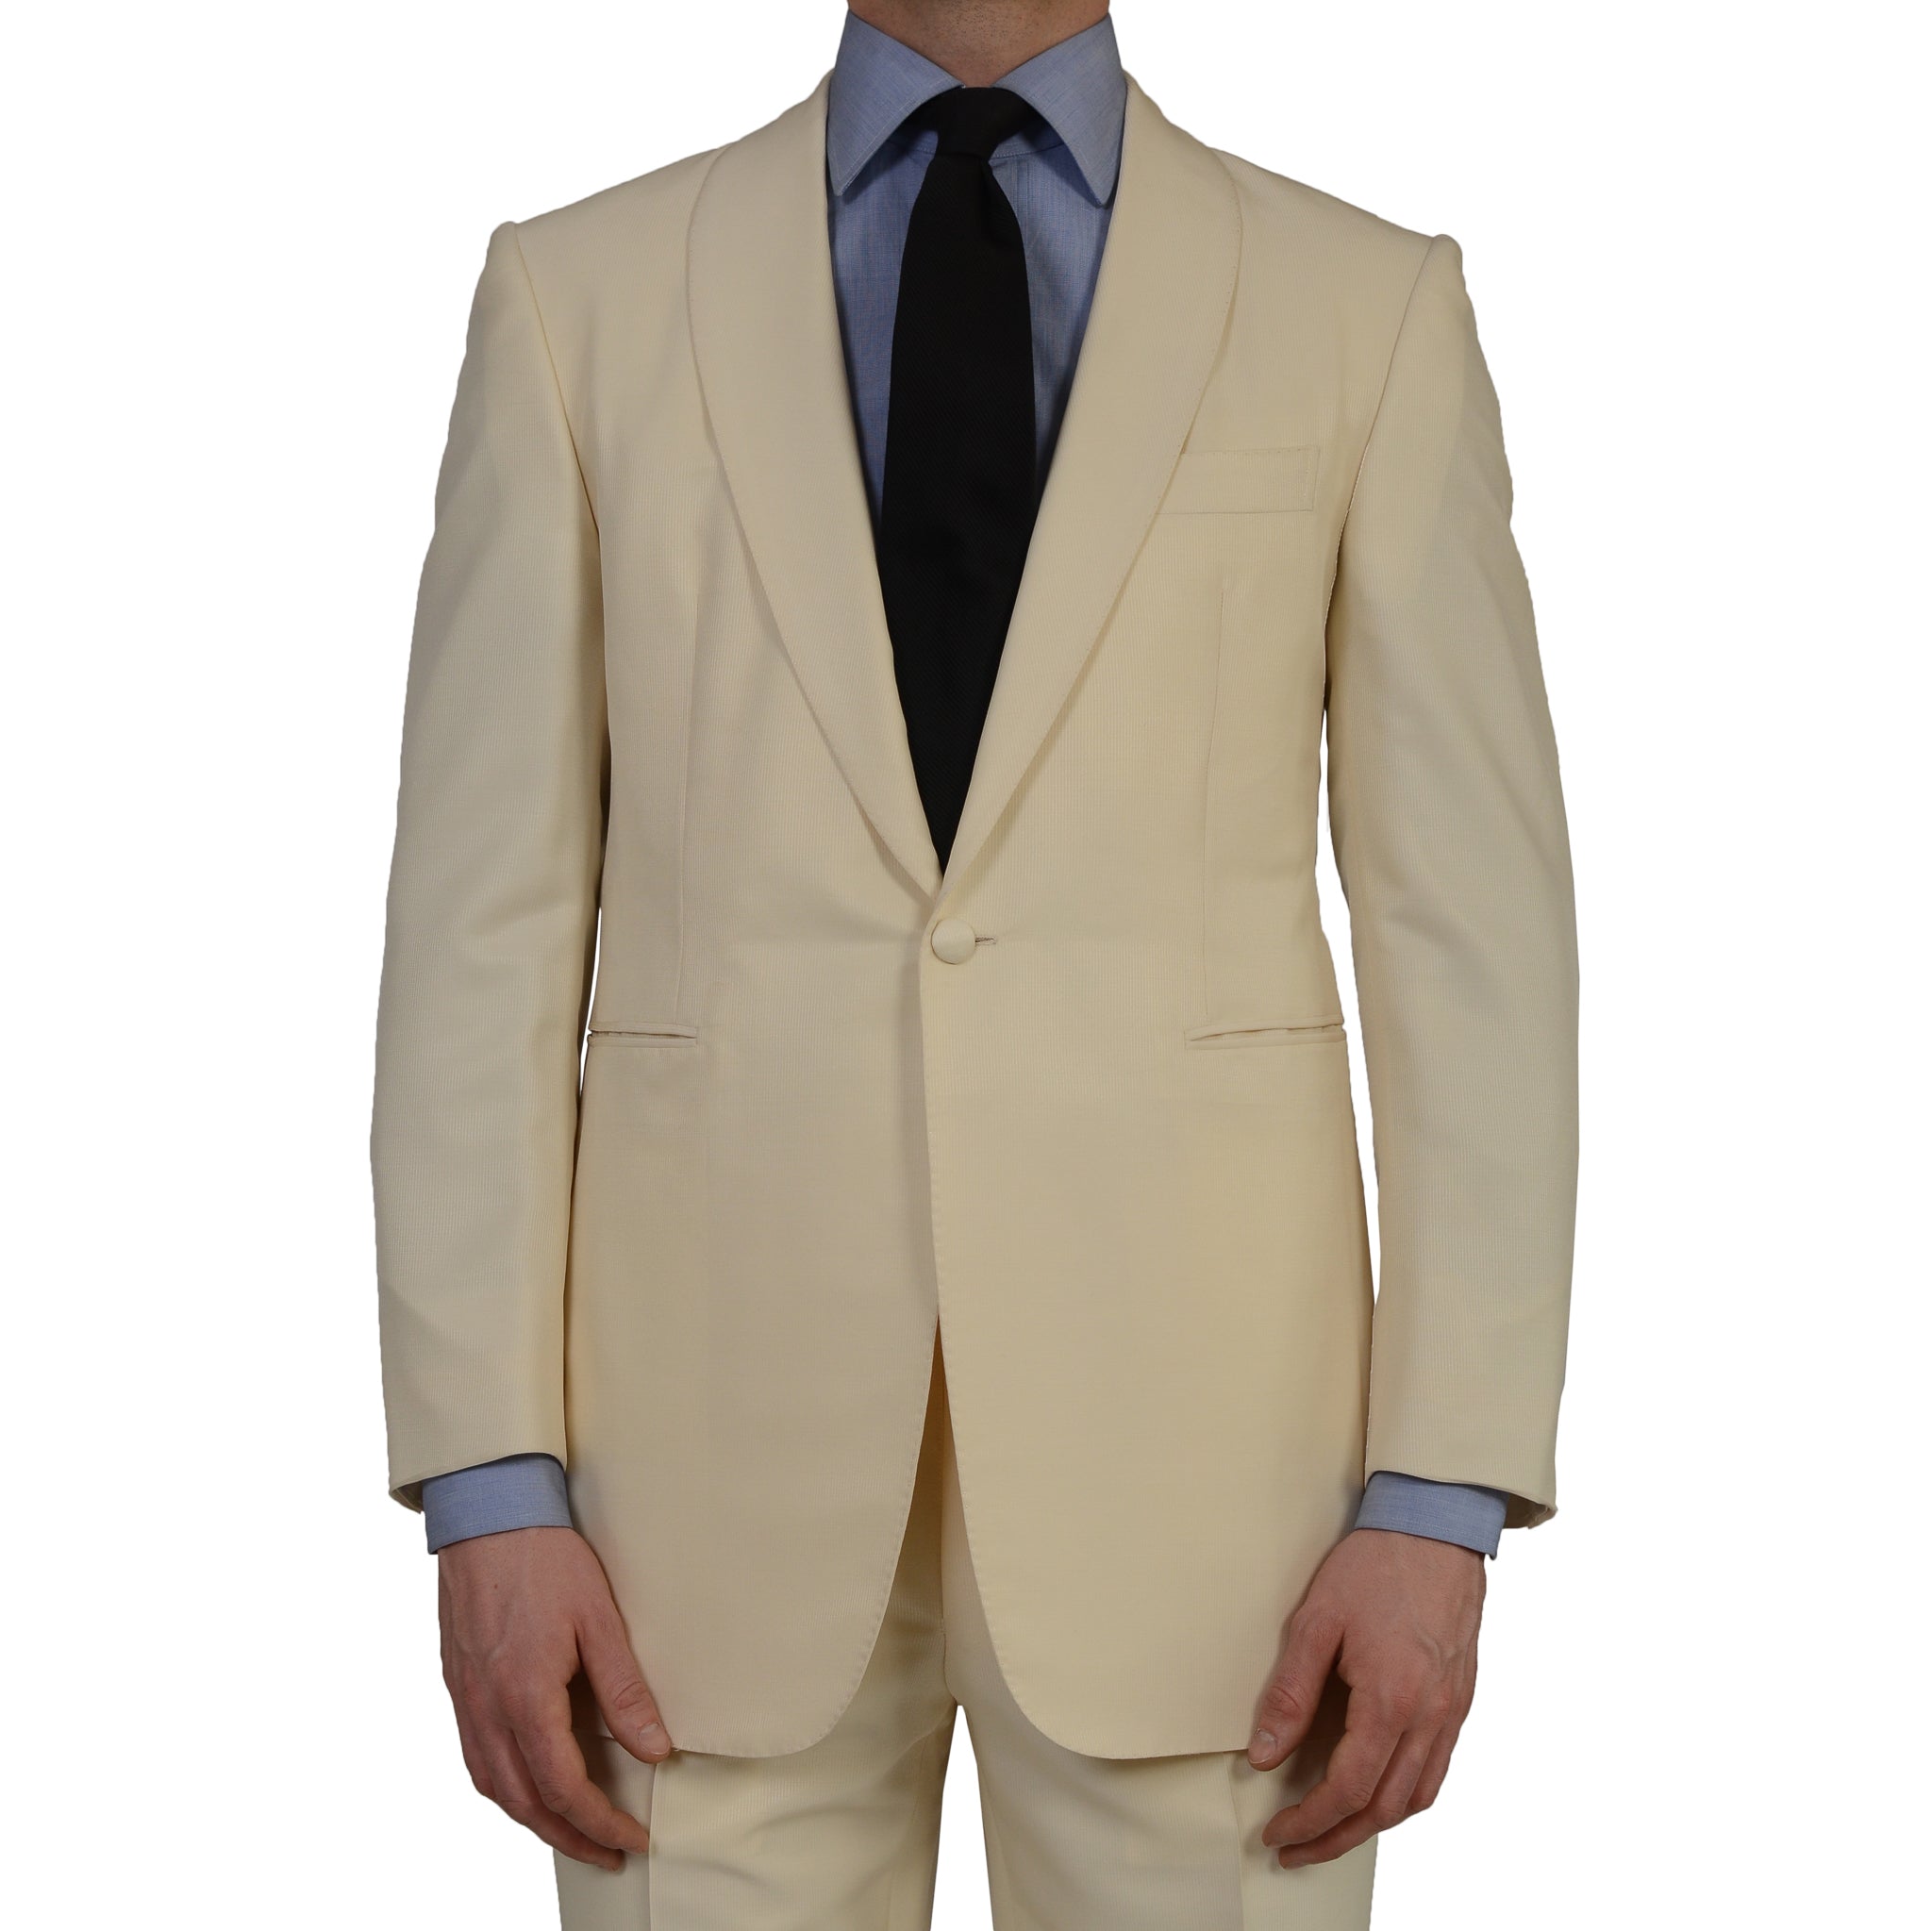 GARY ANDERSON by D'Avenza Cream 1 Button Shawl Collar Tuxedo Suit NEW GARY ANDERSON